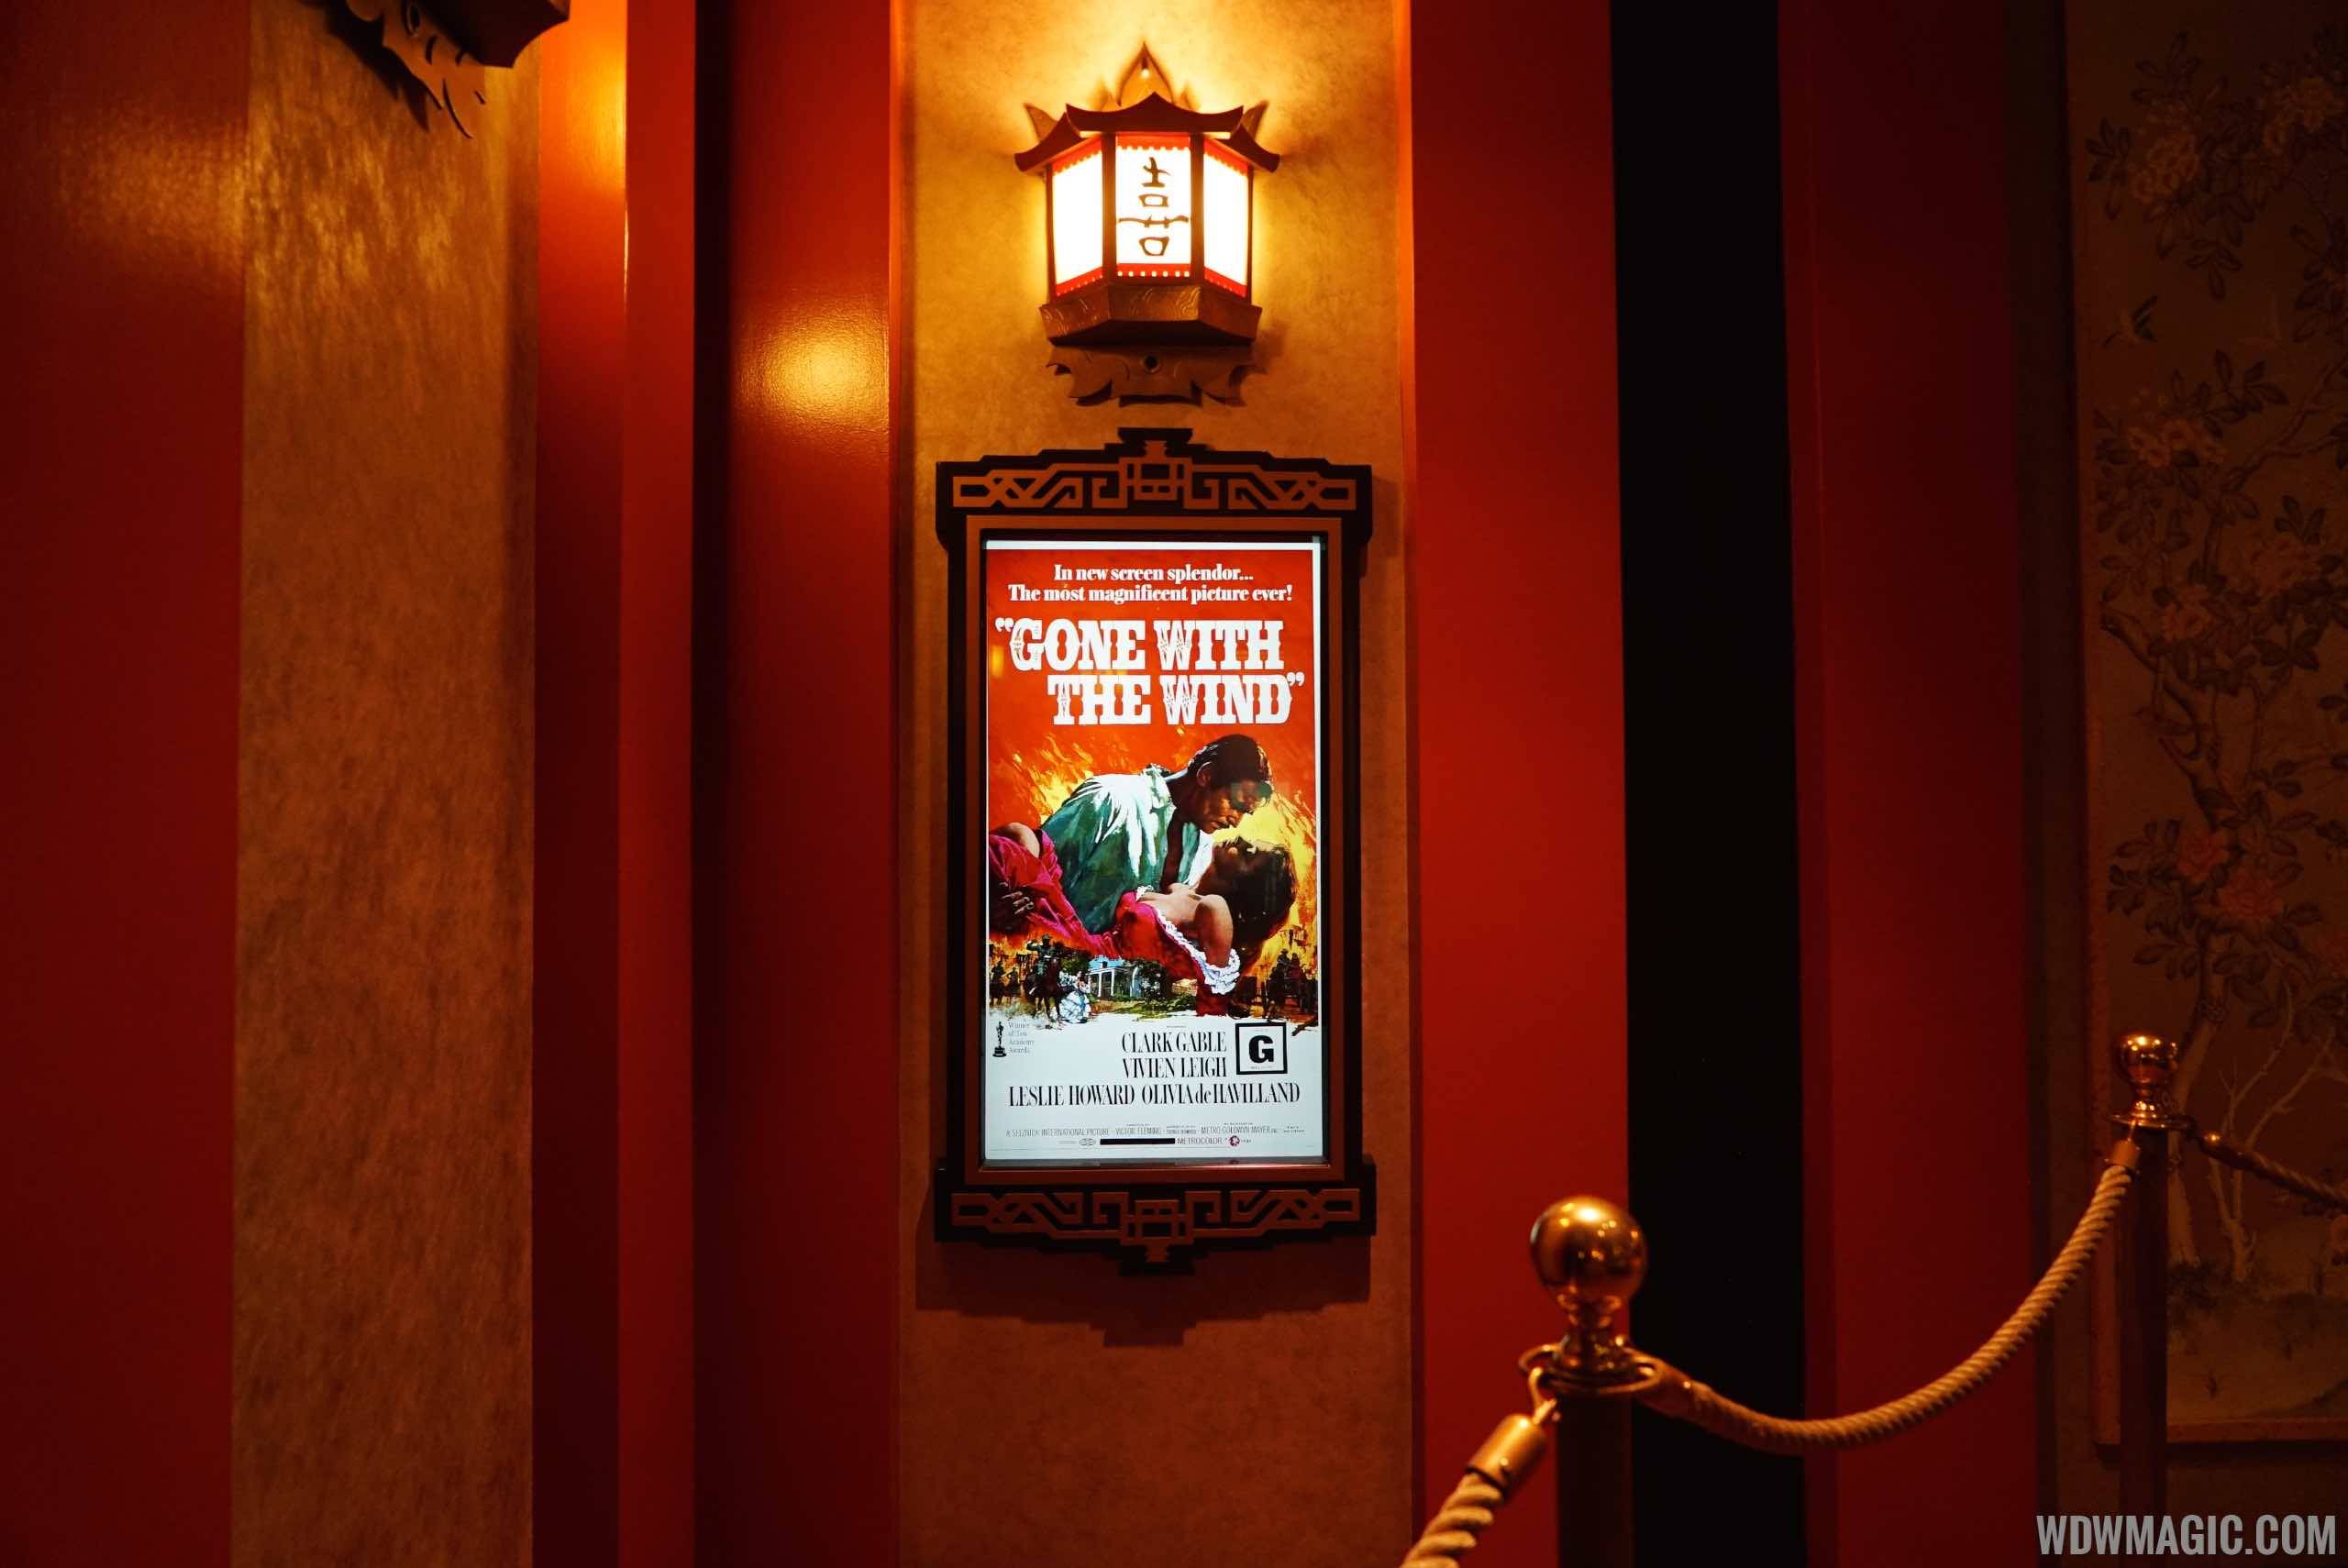 The Great Movie Ride TCM updates - Digital posters in the queue area lobby